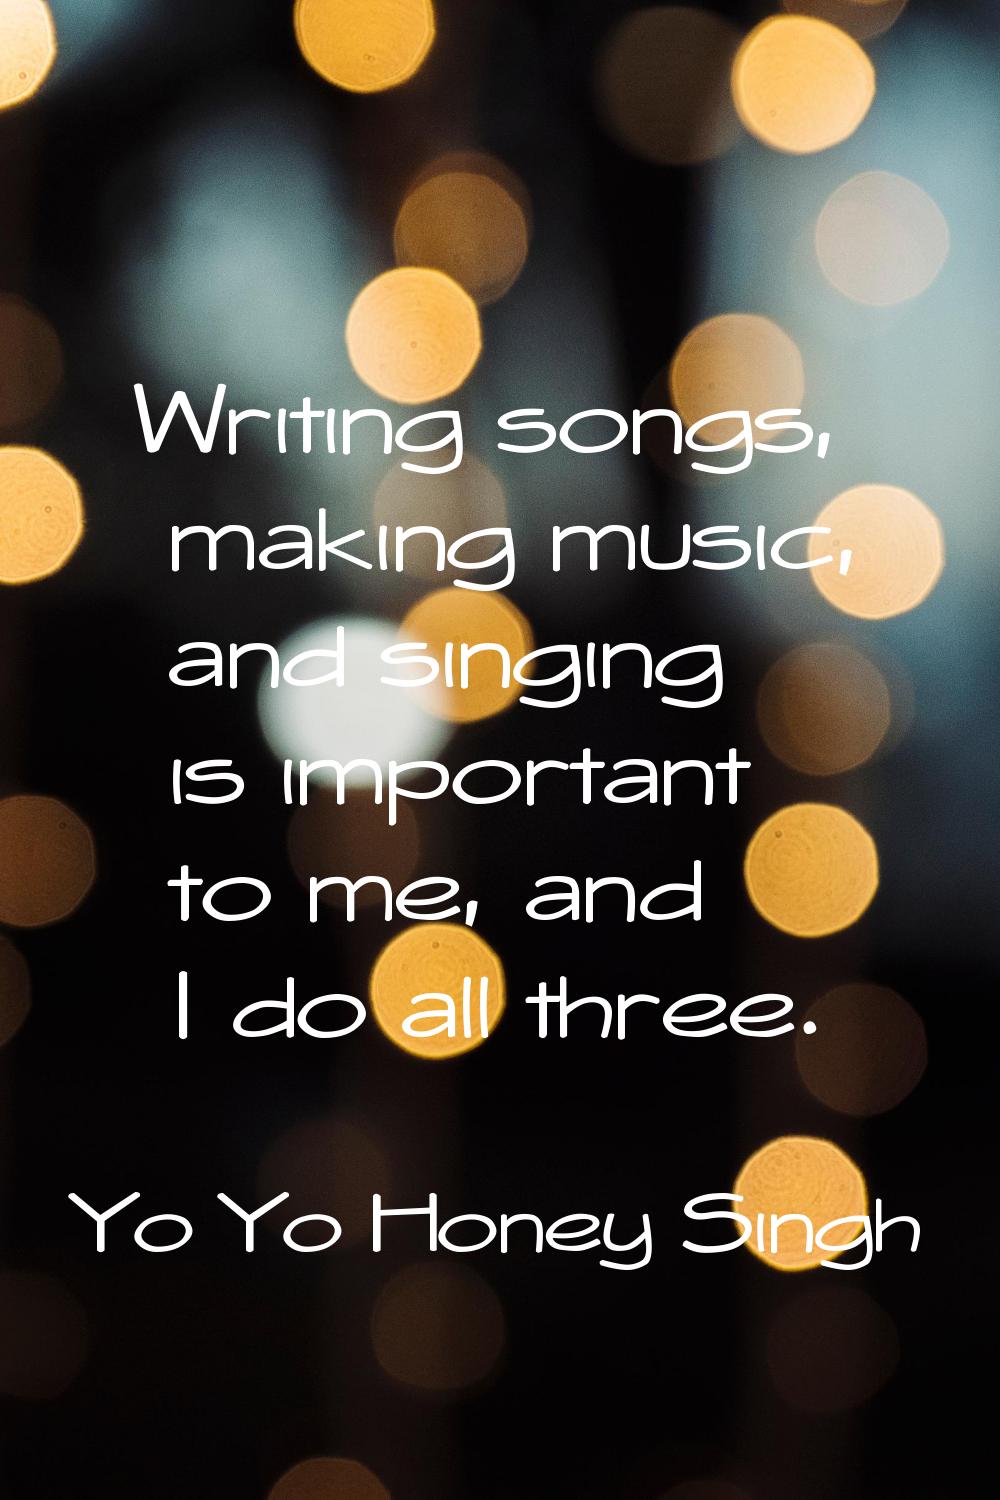 Writing songs, making music, and singing is important to me, and I do all three.